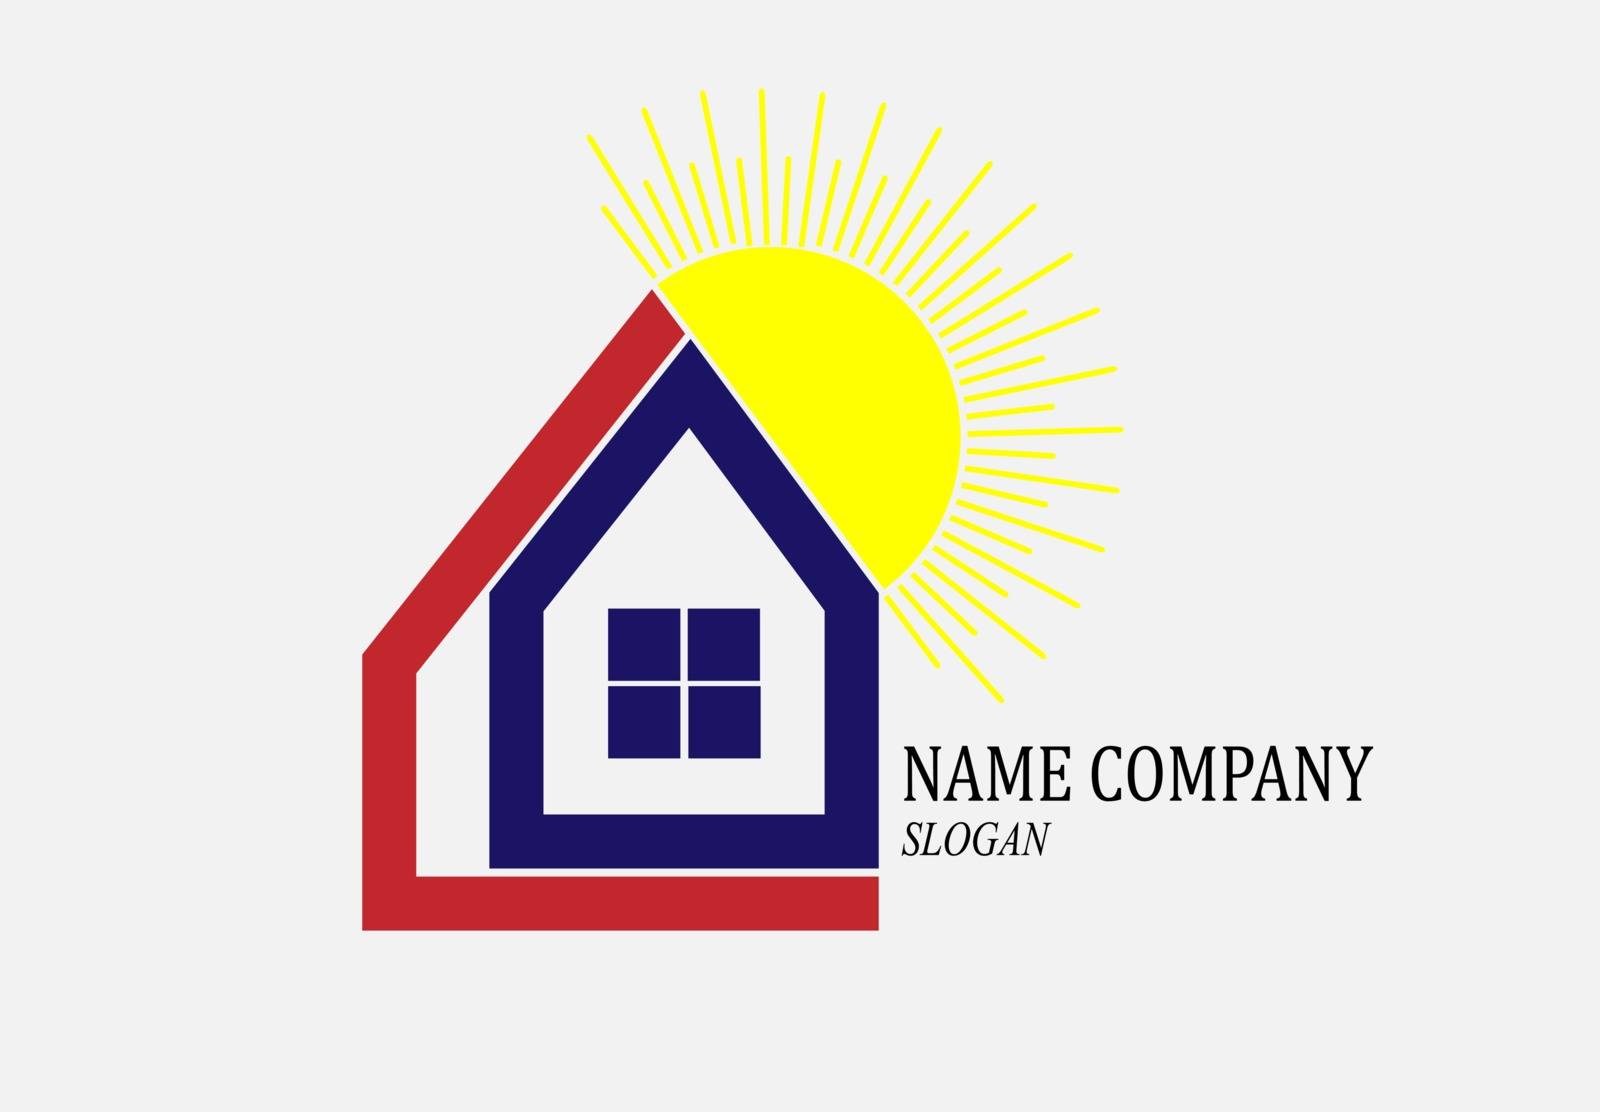 Template for real estate company and construction company logo by Grommik